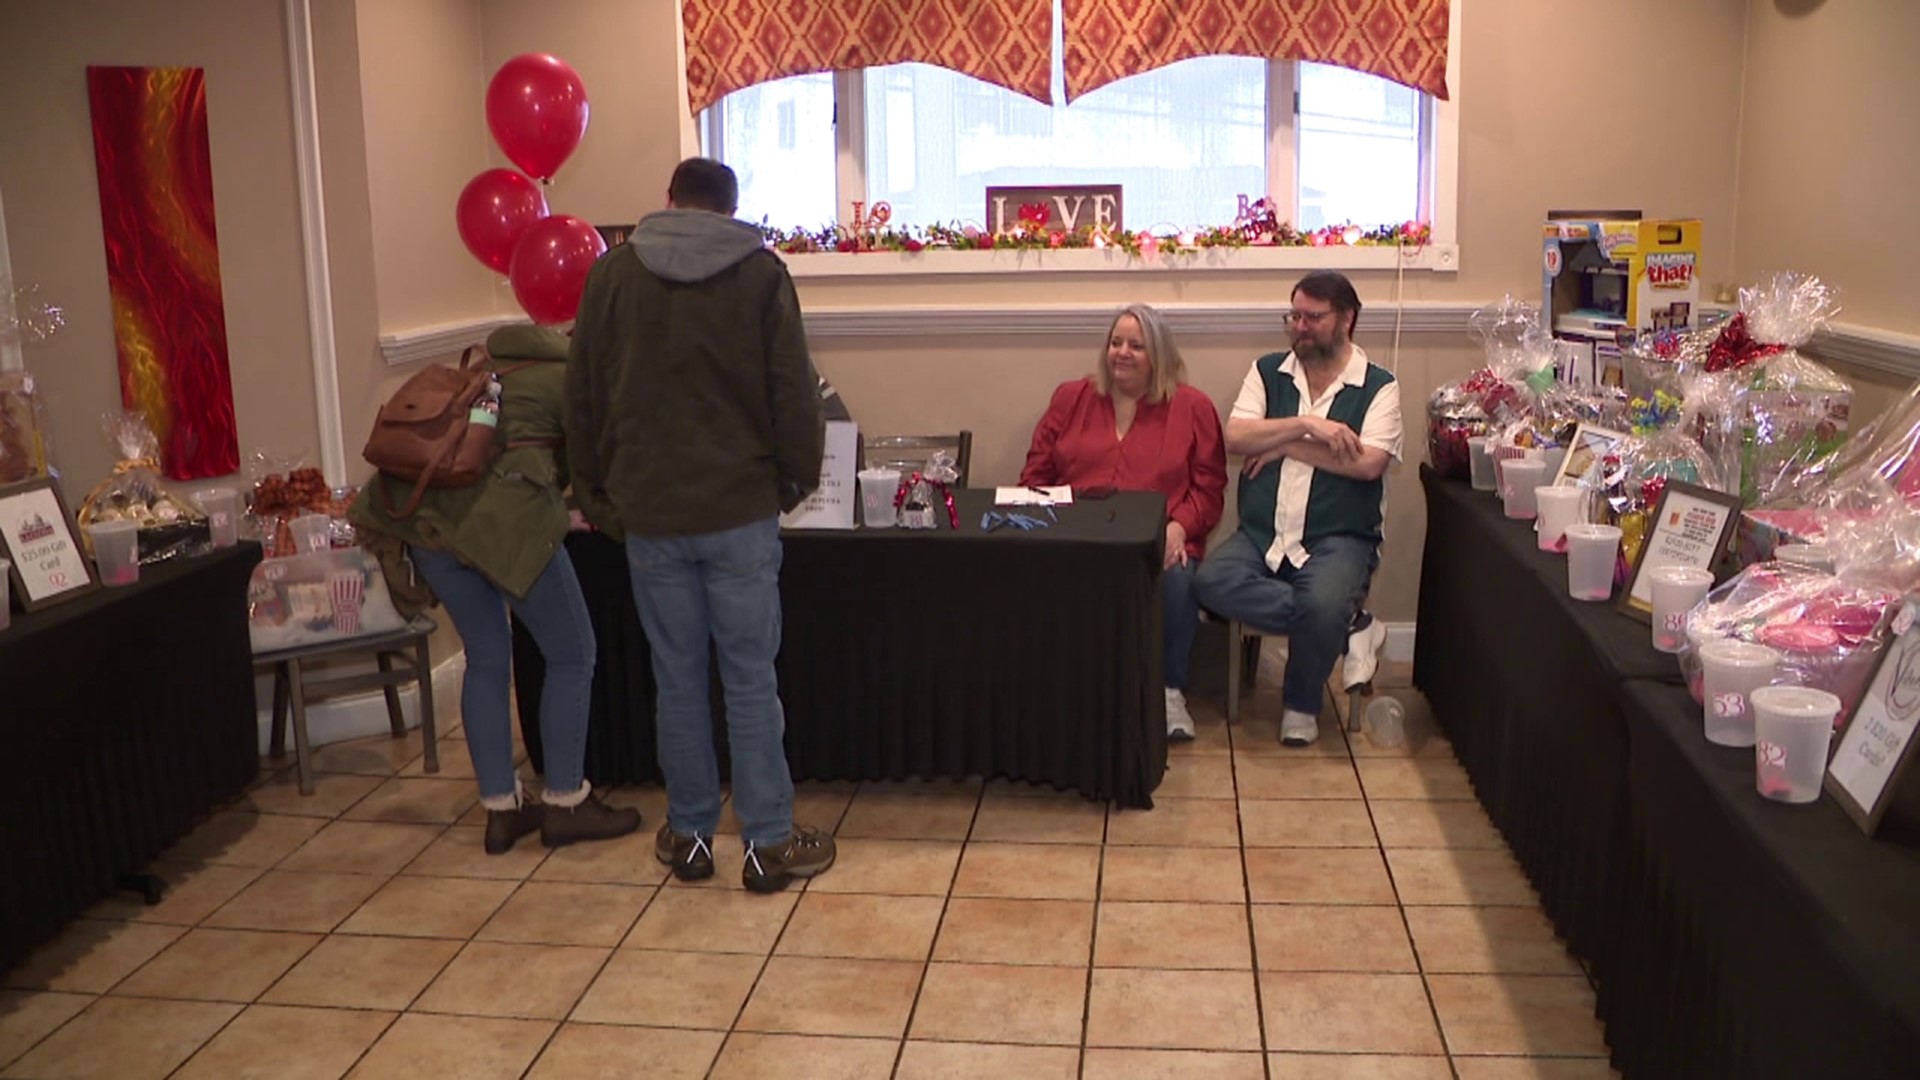 A fundraiser was held in Dunmore to help a man who is undergoing a heart procedure in Boston.